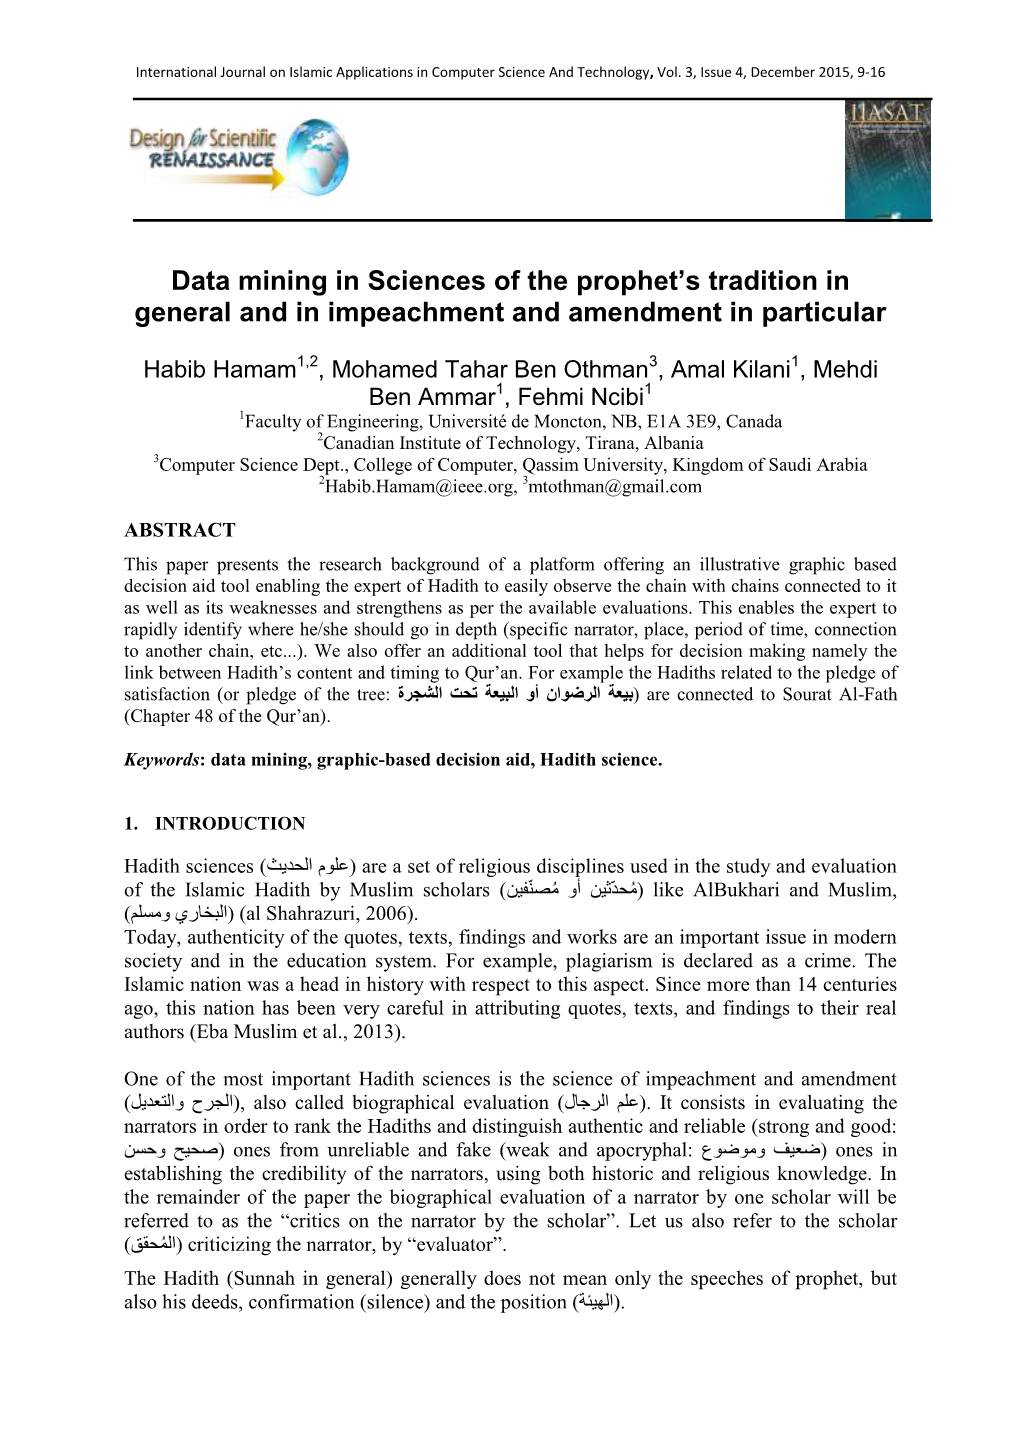 Data Mining in Sciences of the Prophet's Tradition in General and in Impeachment and Amendment in Particular